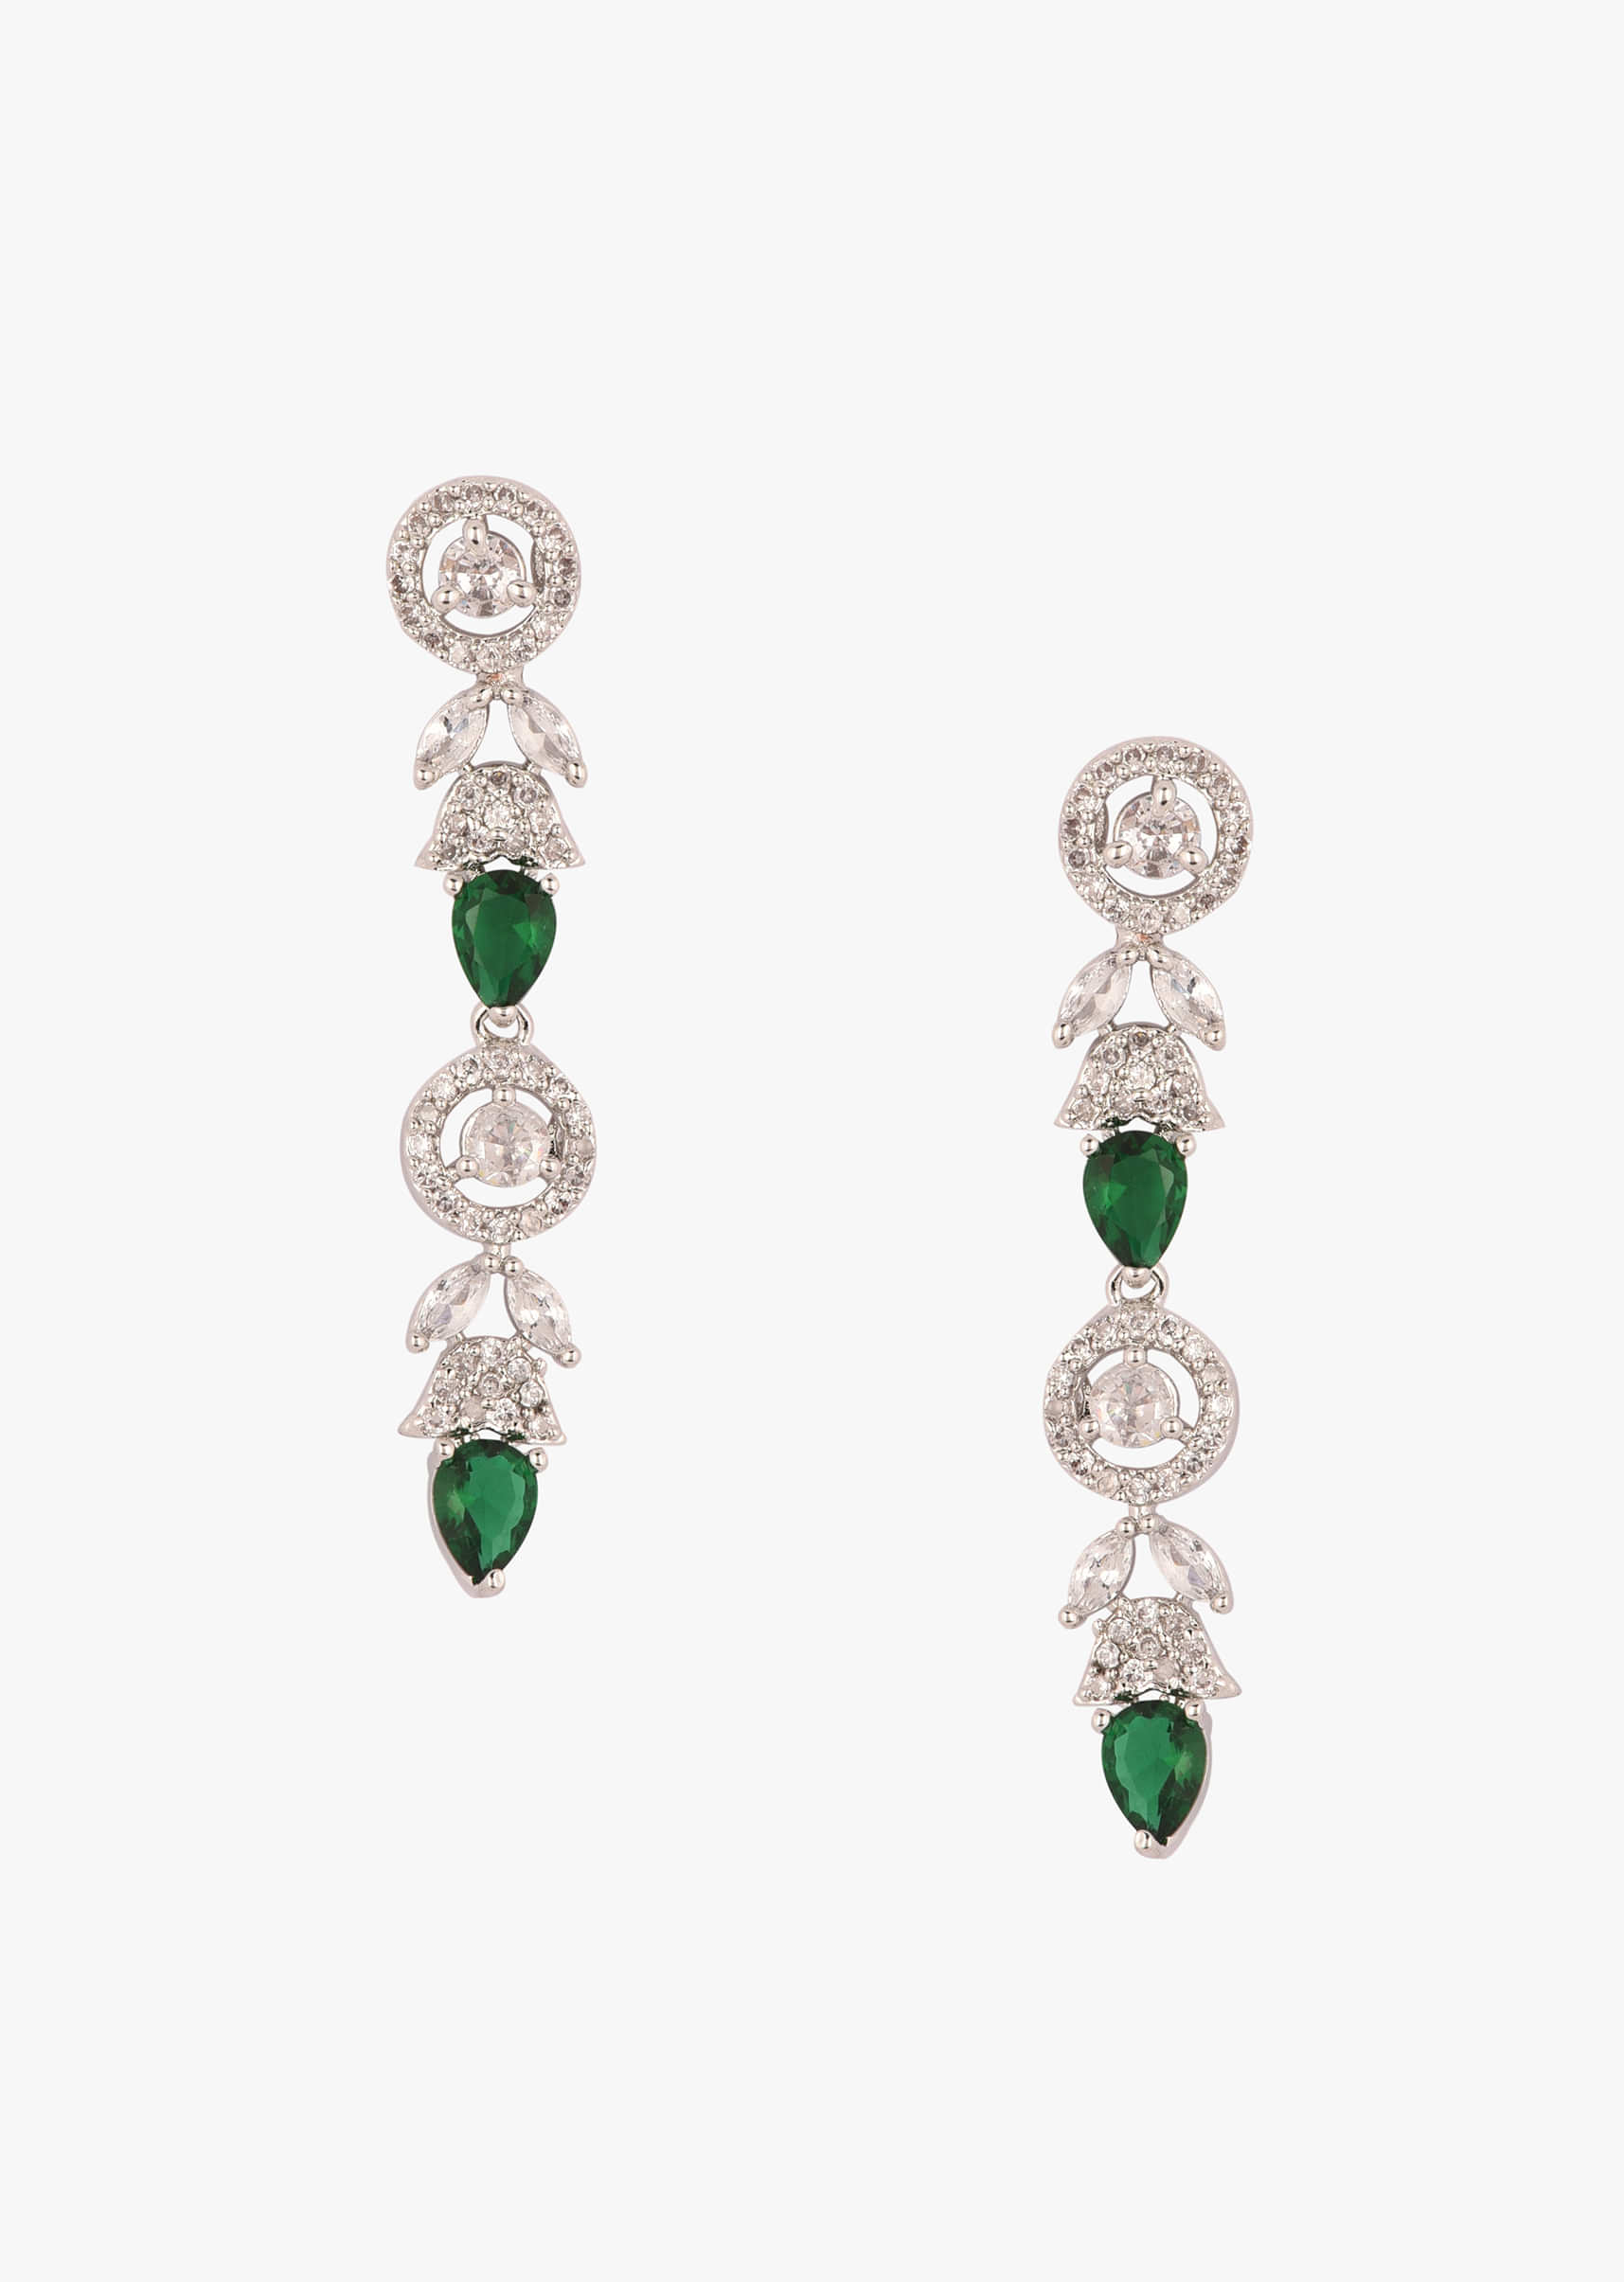 Emerald Green Stone And Diamond Necklace Set In Silver Plated Alloy